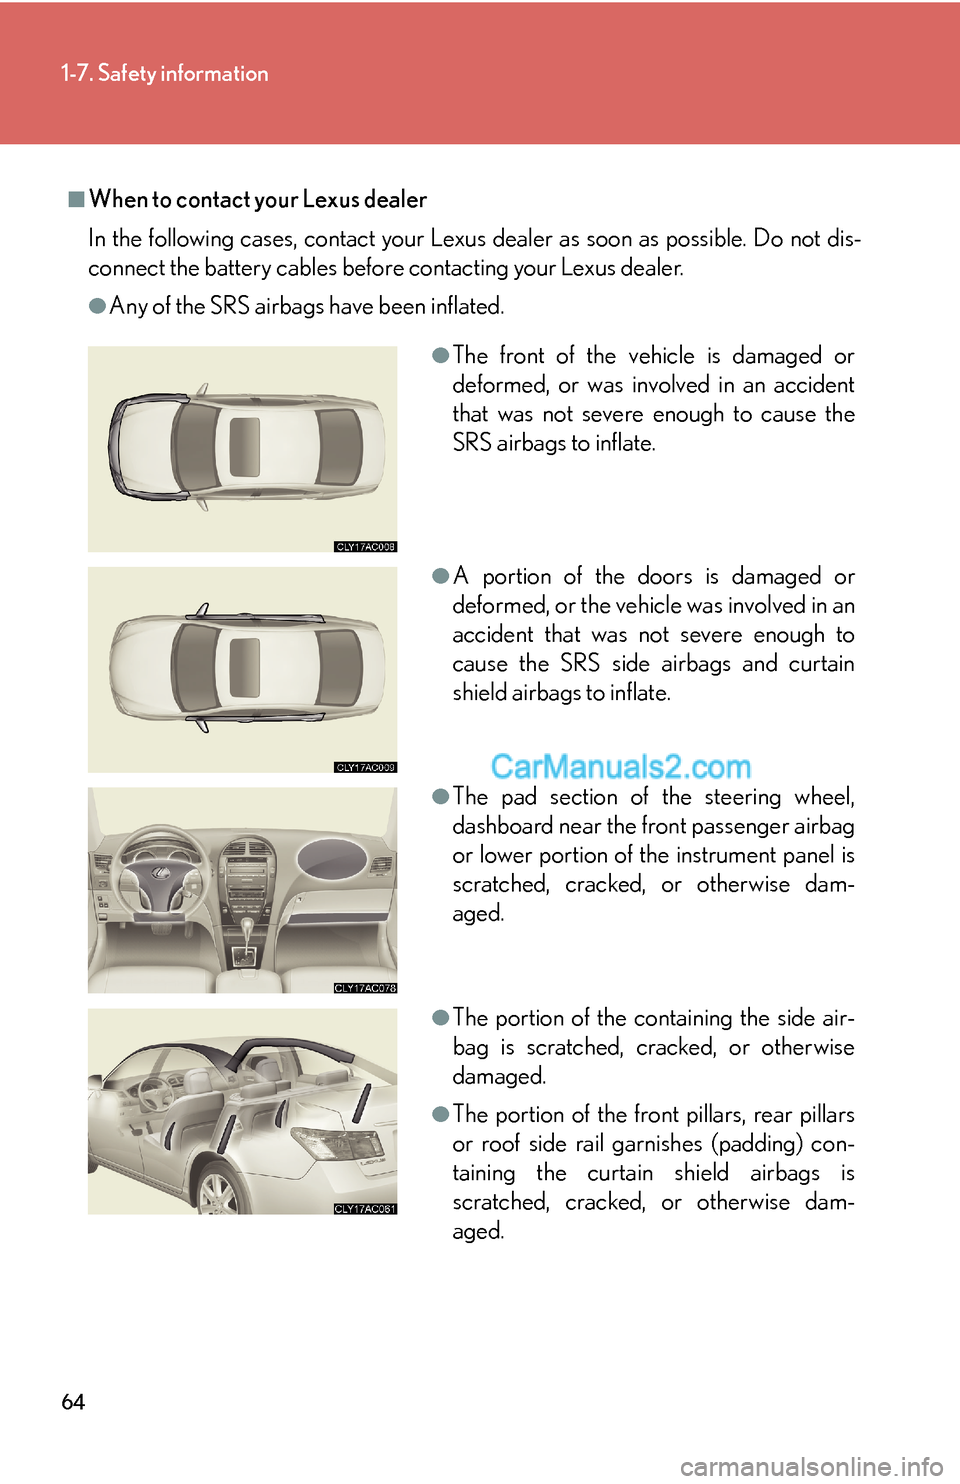 Lexus ES350 2007  Safety information 64
1-7. Safety information
■When to contact your Lexus dealer
In the following cases, contact your Lexus dealer as soon as possible. Do not dis-
connect the battery cables before contacting your Lex